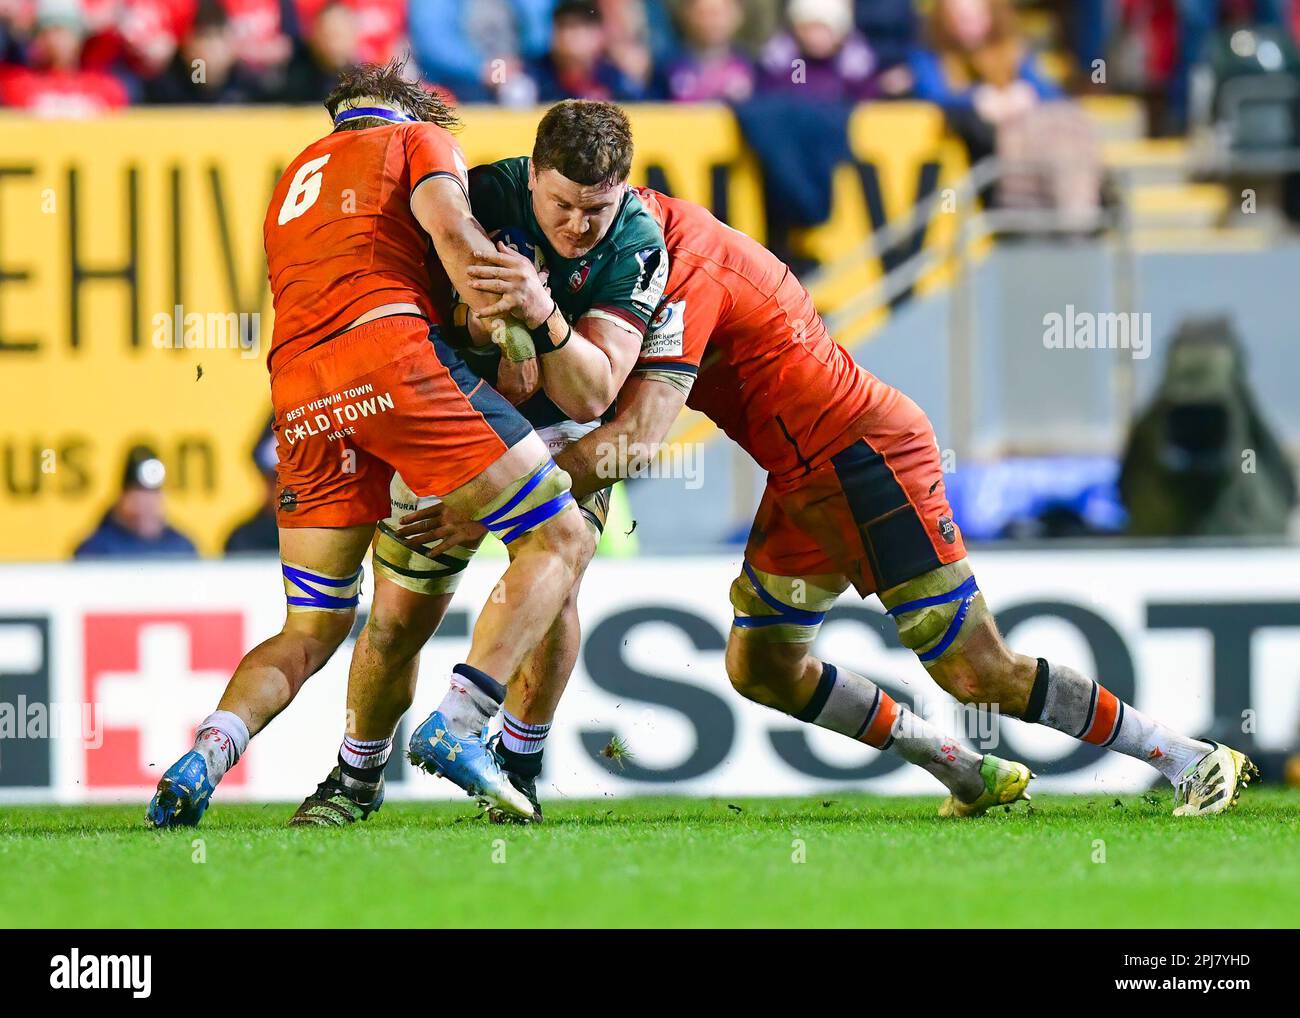 Jasper Weise (Leicester Tigers)  v Edinburgh Rugby Team at the Mattioli Stadium in Leicester, UK on 31 March 2023.  Jasper Weise (Leicester Tigers) tackled by Jamie Ritchie (Edinburgh) at the Mattioli Rugby Stadium, Leicester, Uk  Credit: Mark Dunn/Alamy Live News Stock Photo